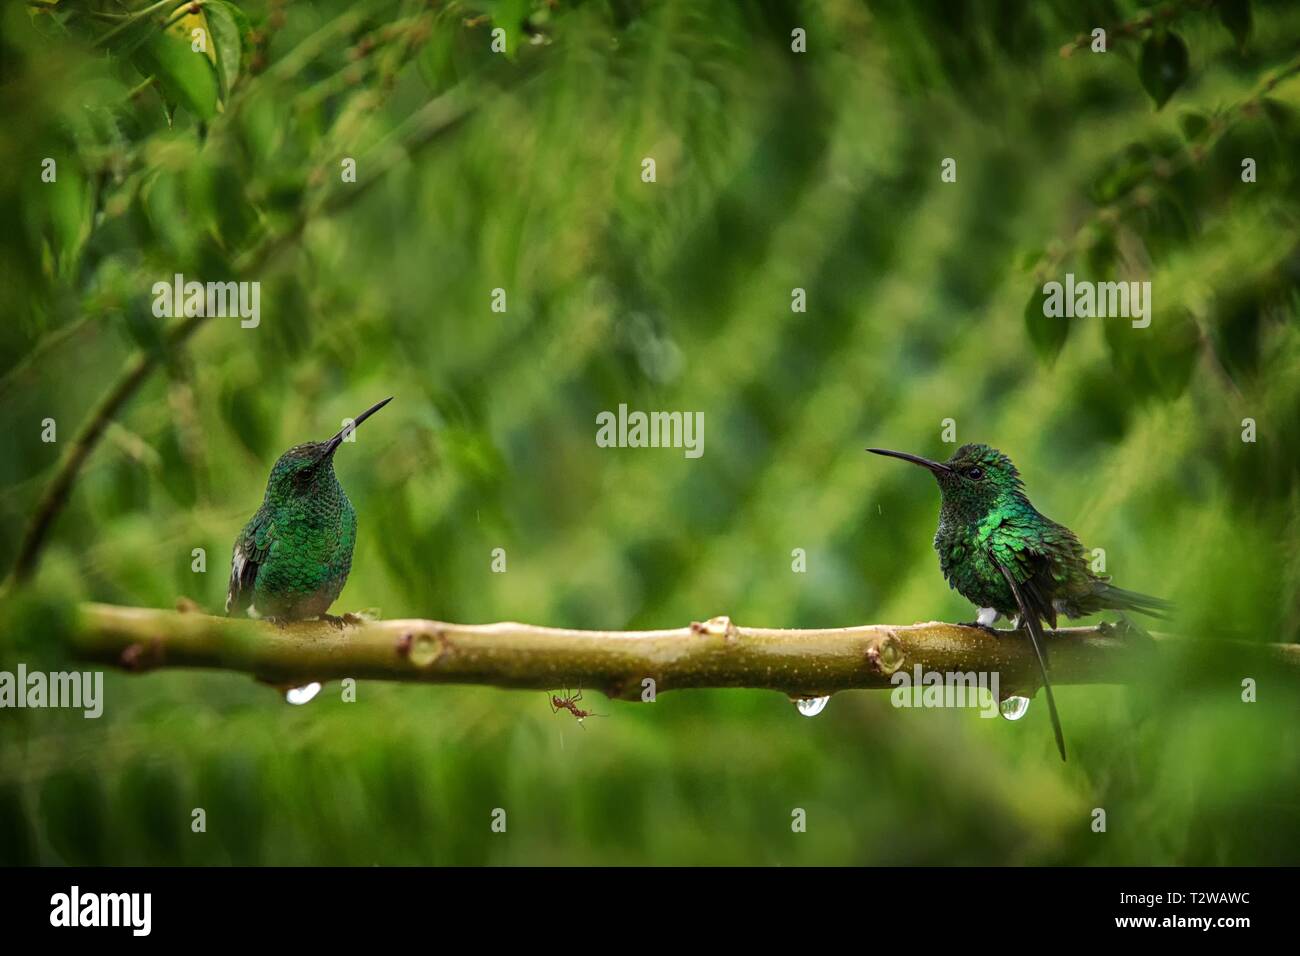 Two hummingbirds Glowing Puffleg sitting on branch in rain in tropical  forest,Colombia,bird perching,tiny beautiful bird resting on tree in garden,cl Stock Photo